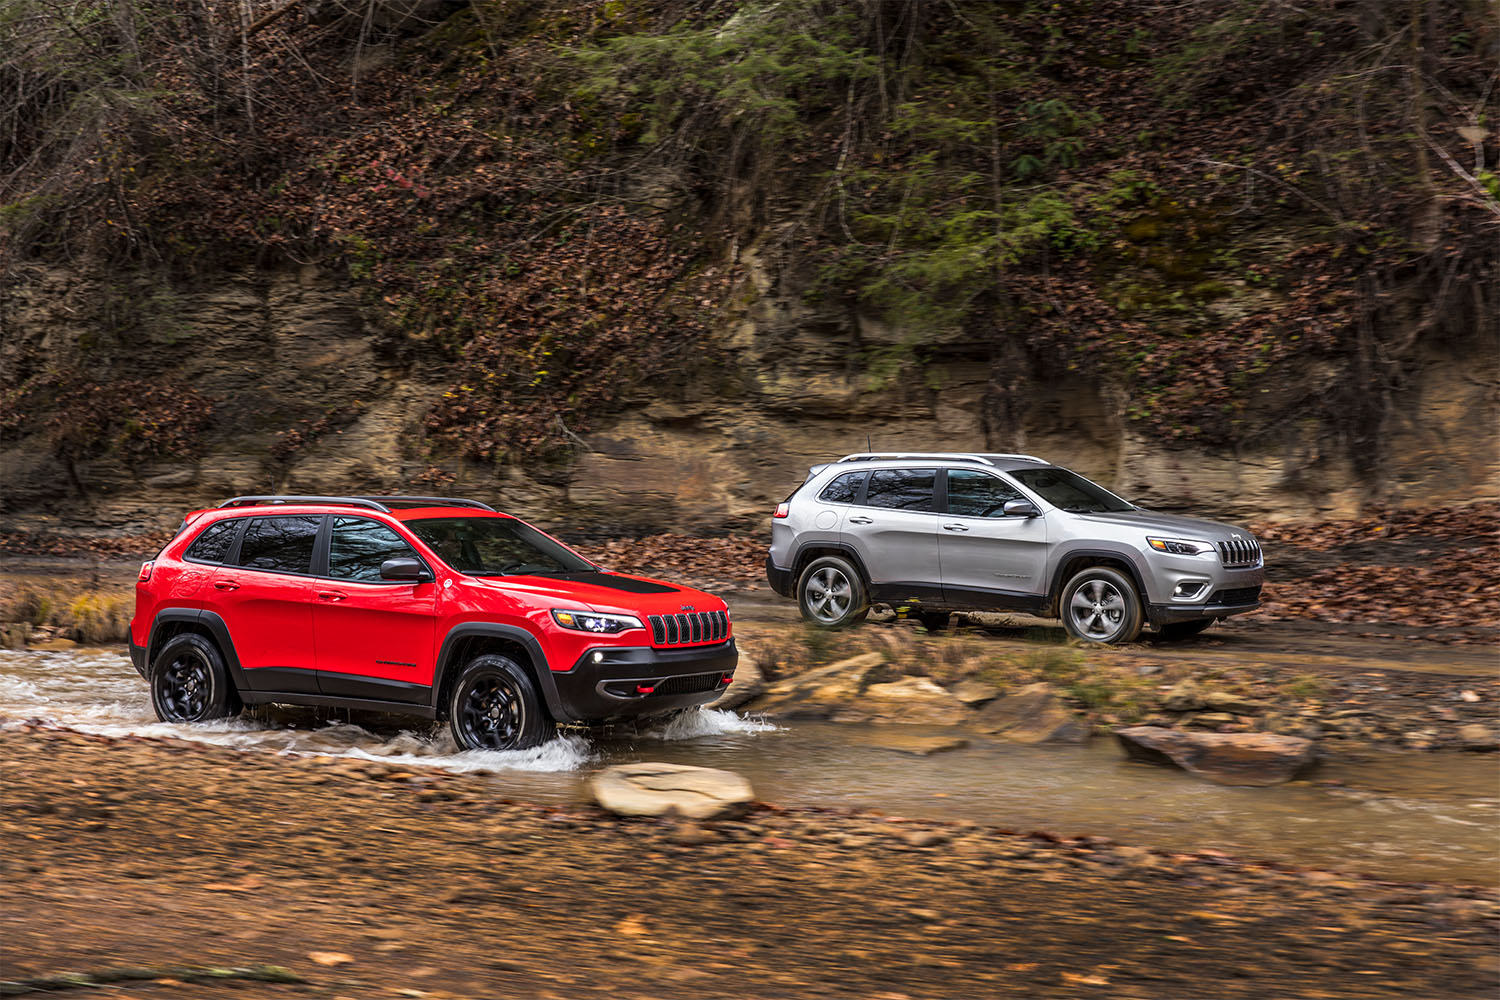 Test Drive SUVs with Uptown Chrysler Jeep Dodge Ram available in Slinger, WI at Uptown Chrysler Dodge Jeep Ram